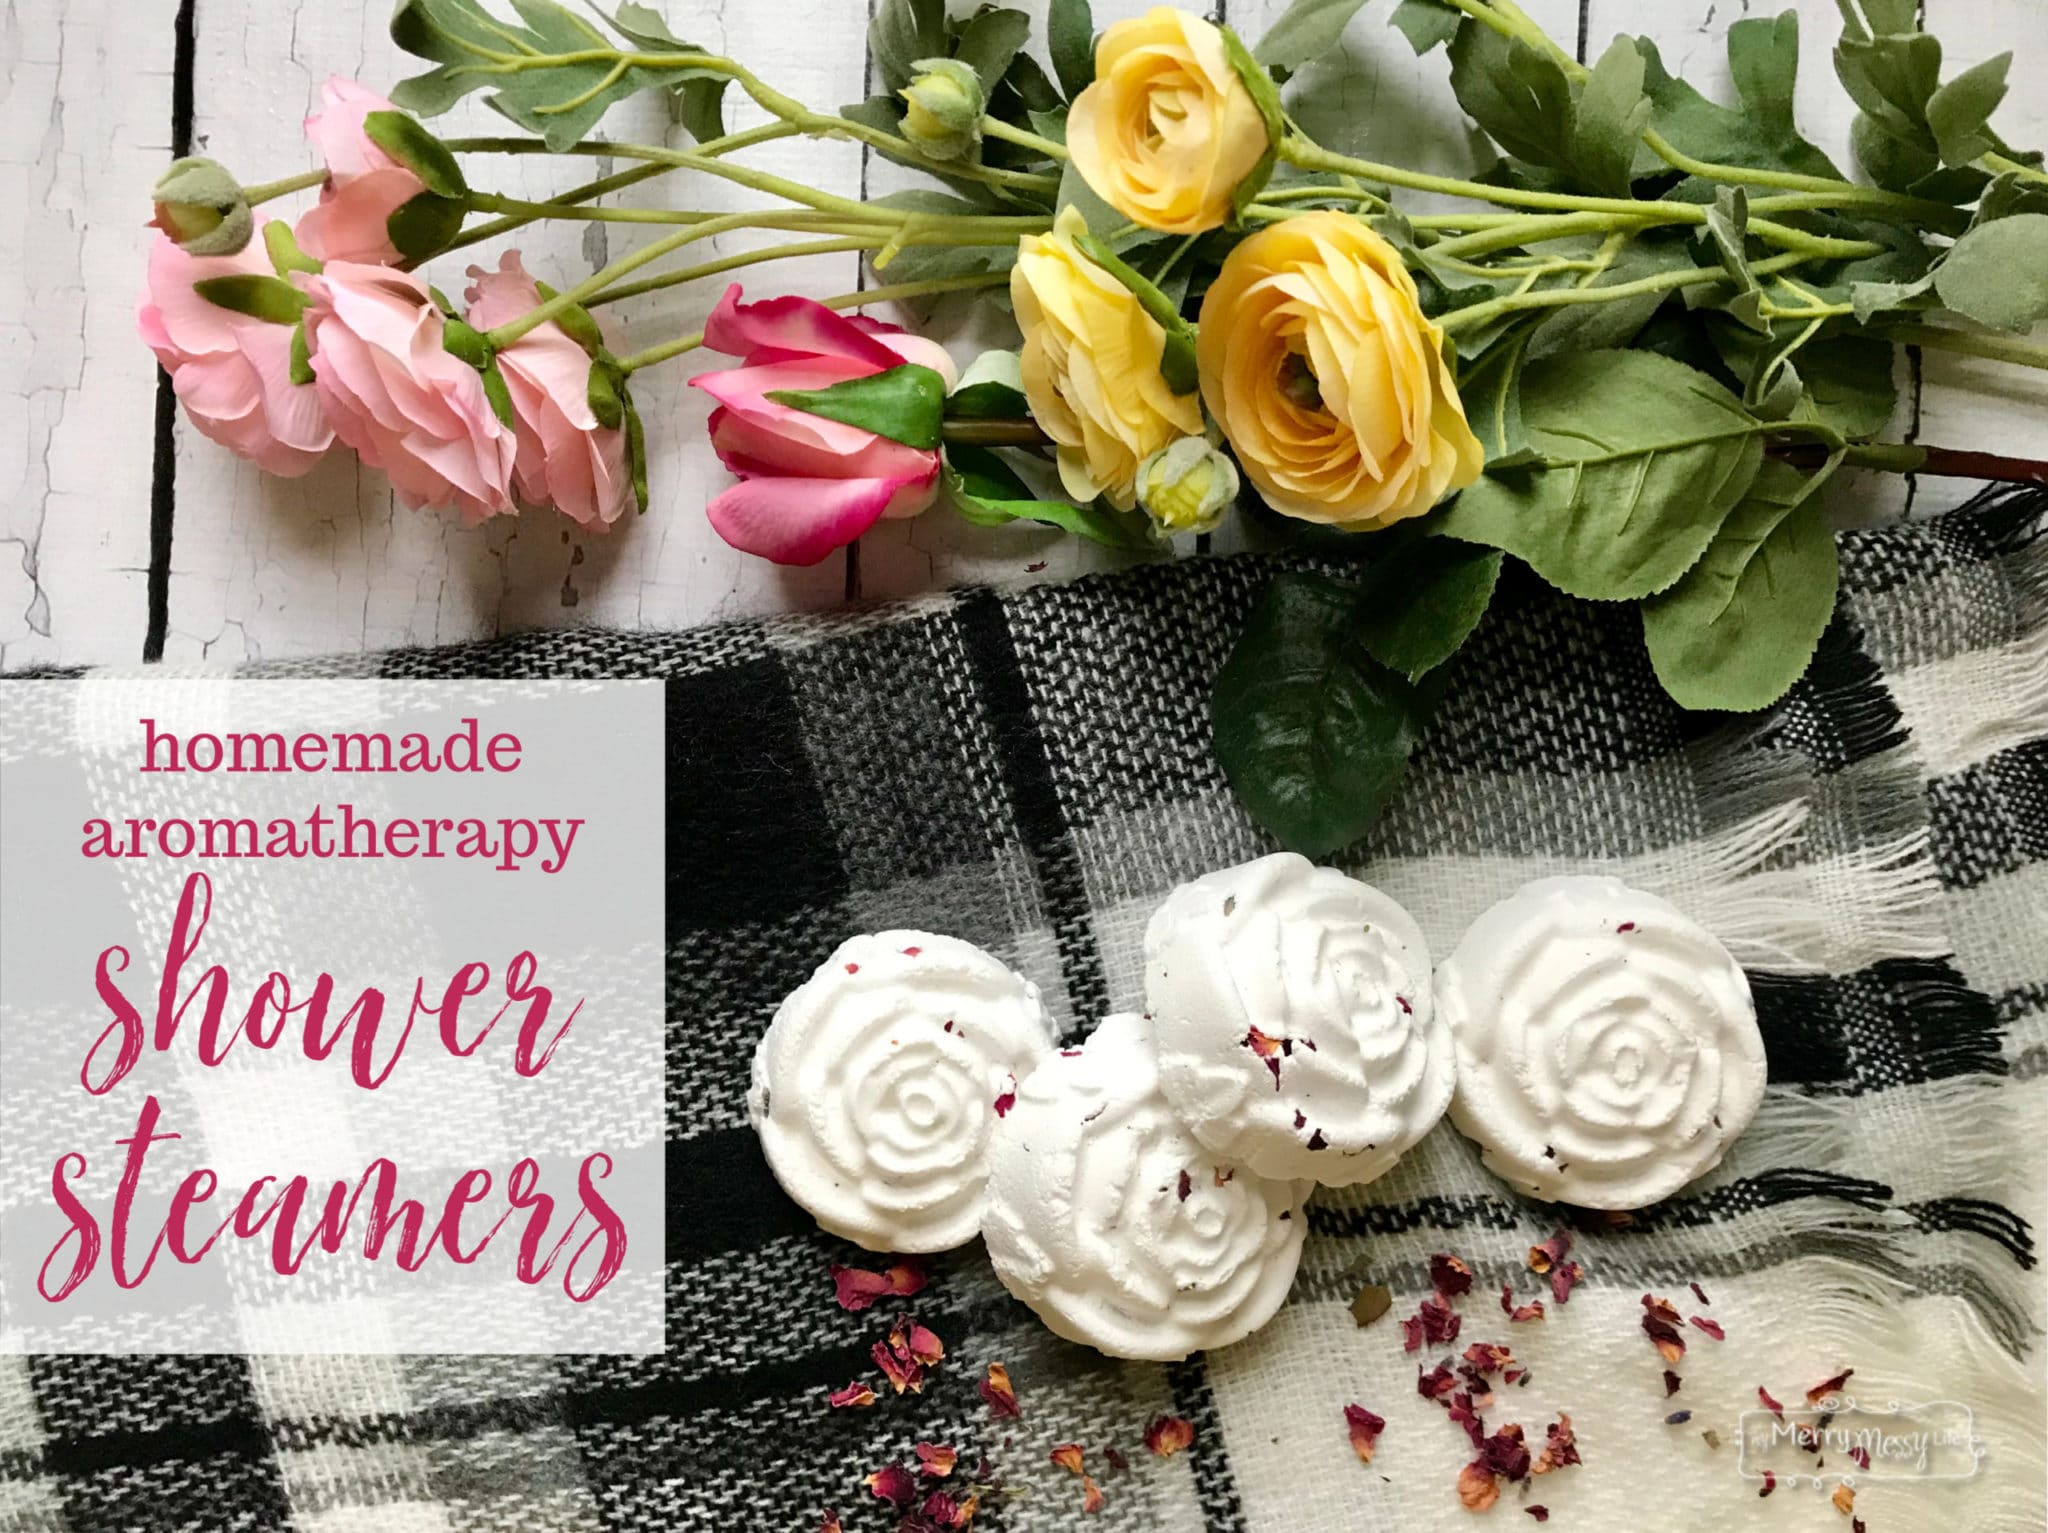 Homemade Aromatherapy Shower Steamers using Essential Oils